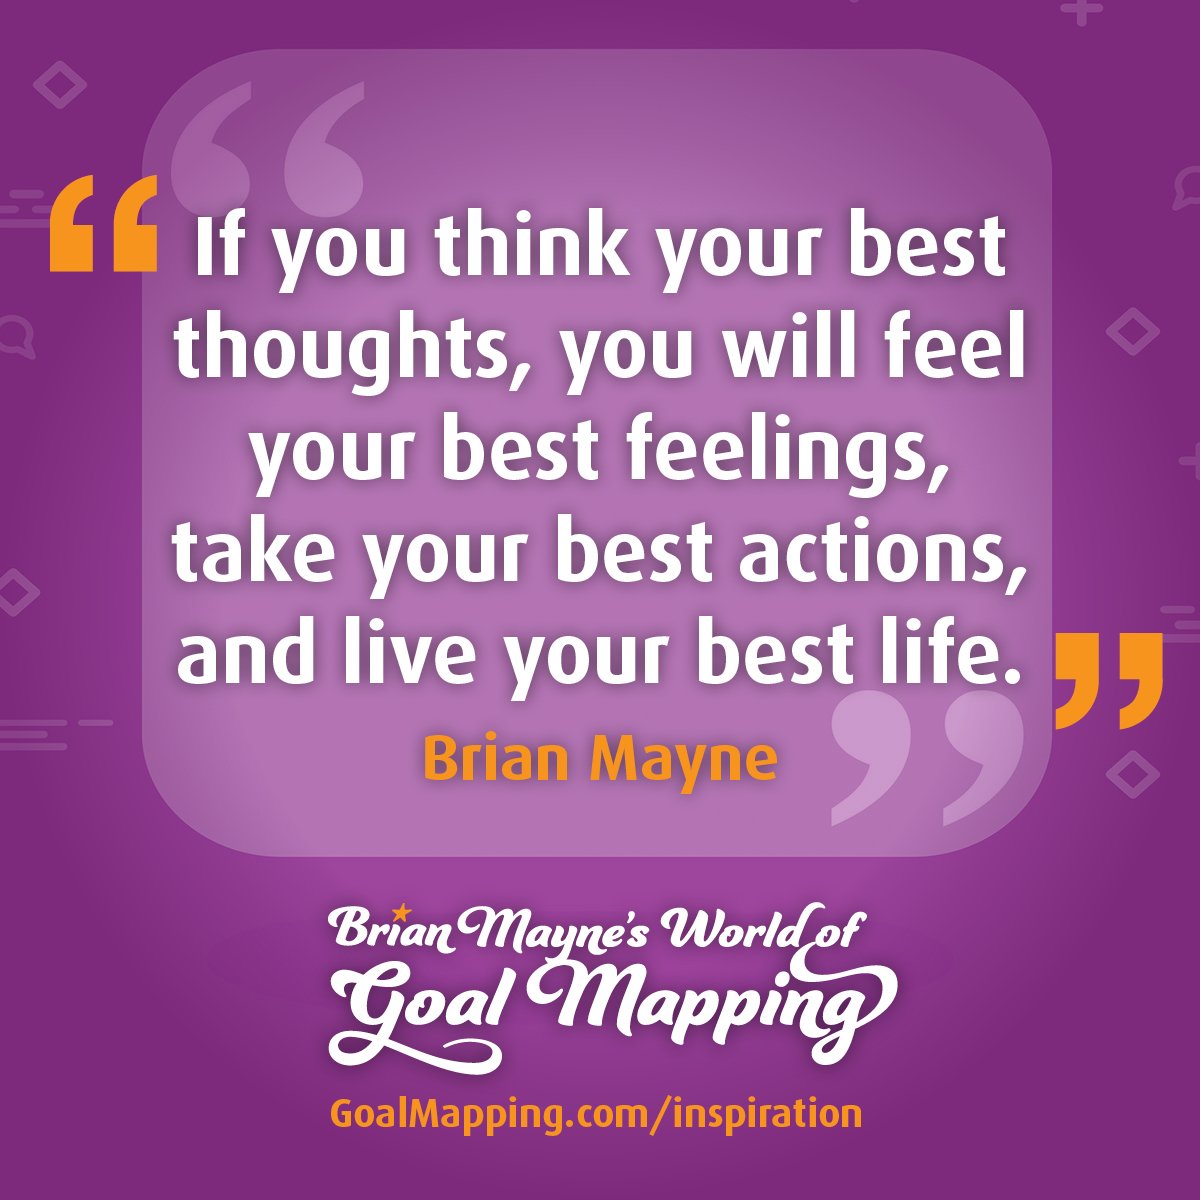 "If you think your best thoughts, you will feel your best feelings, take your best actions, and live your best life." Brian Mayne